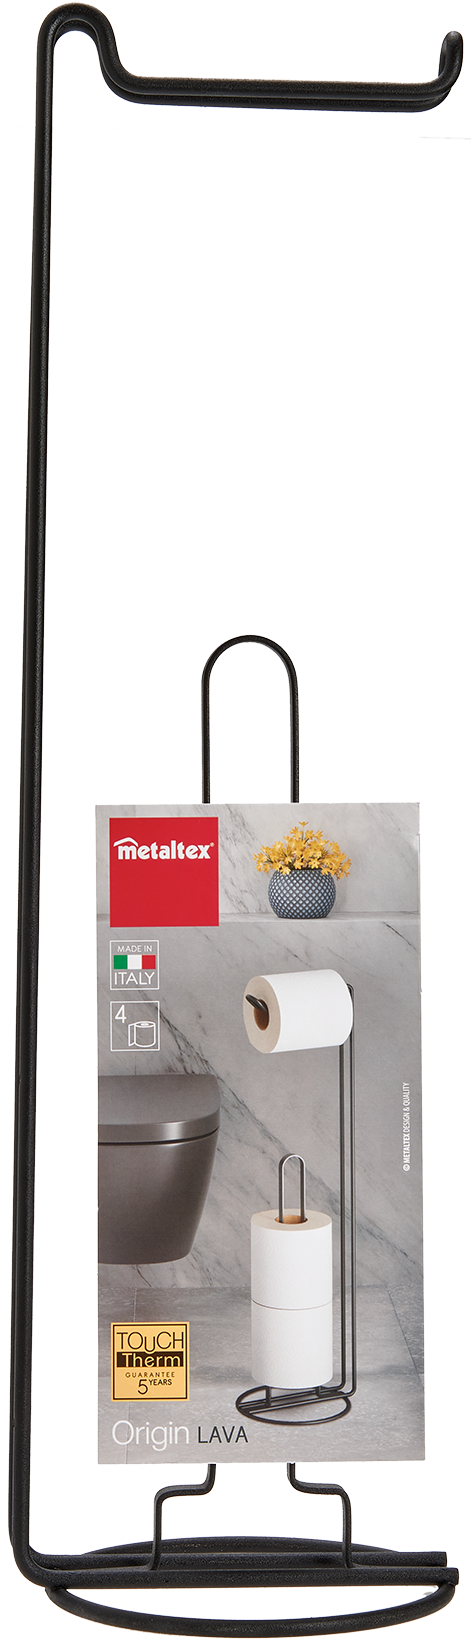 Metaltex Toilet Roll Holder With Dispenser, Carded, 15X58 Cm